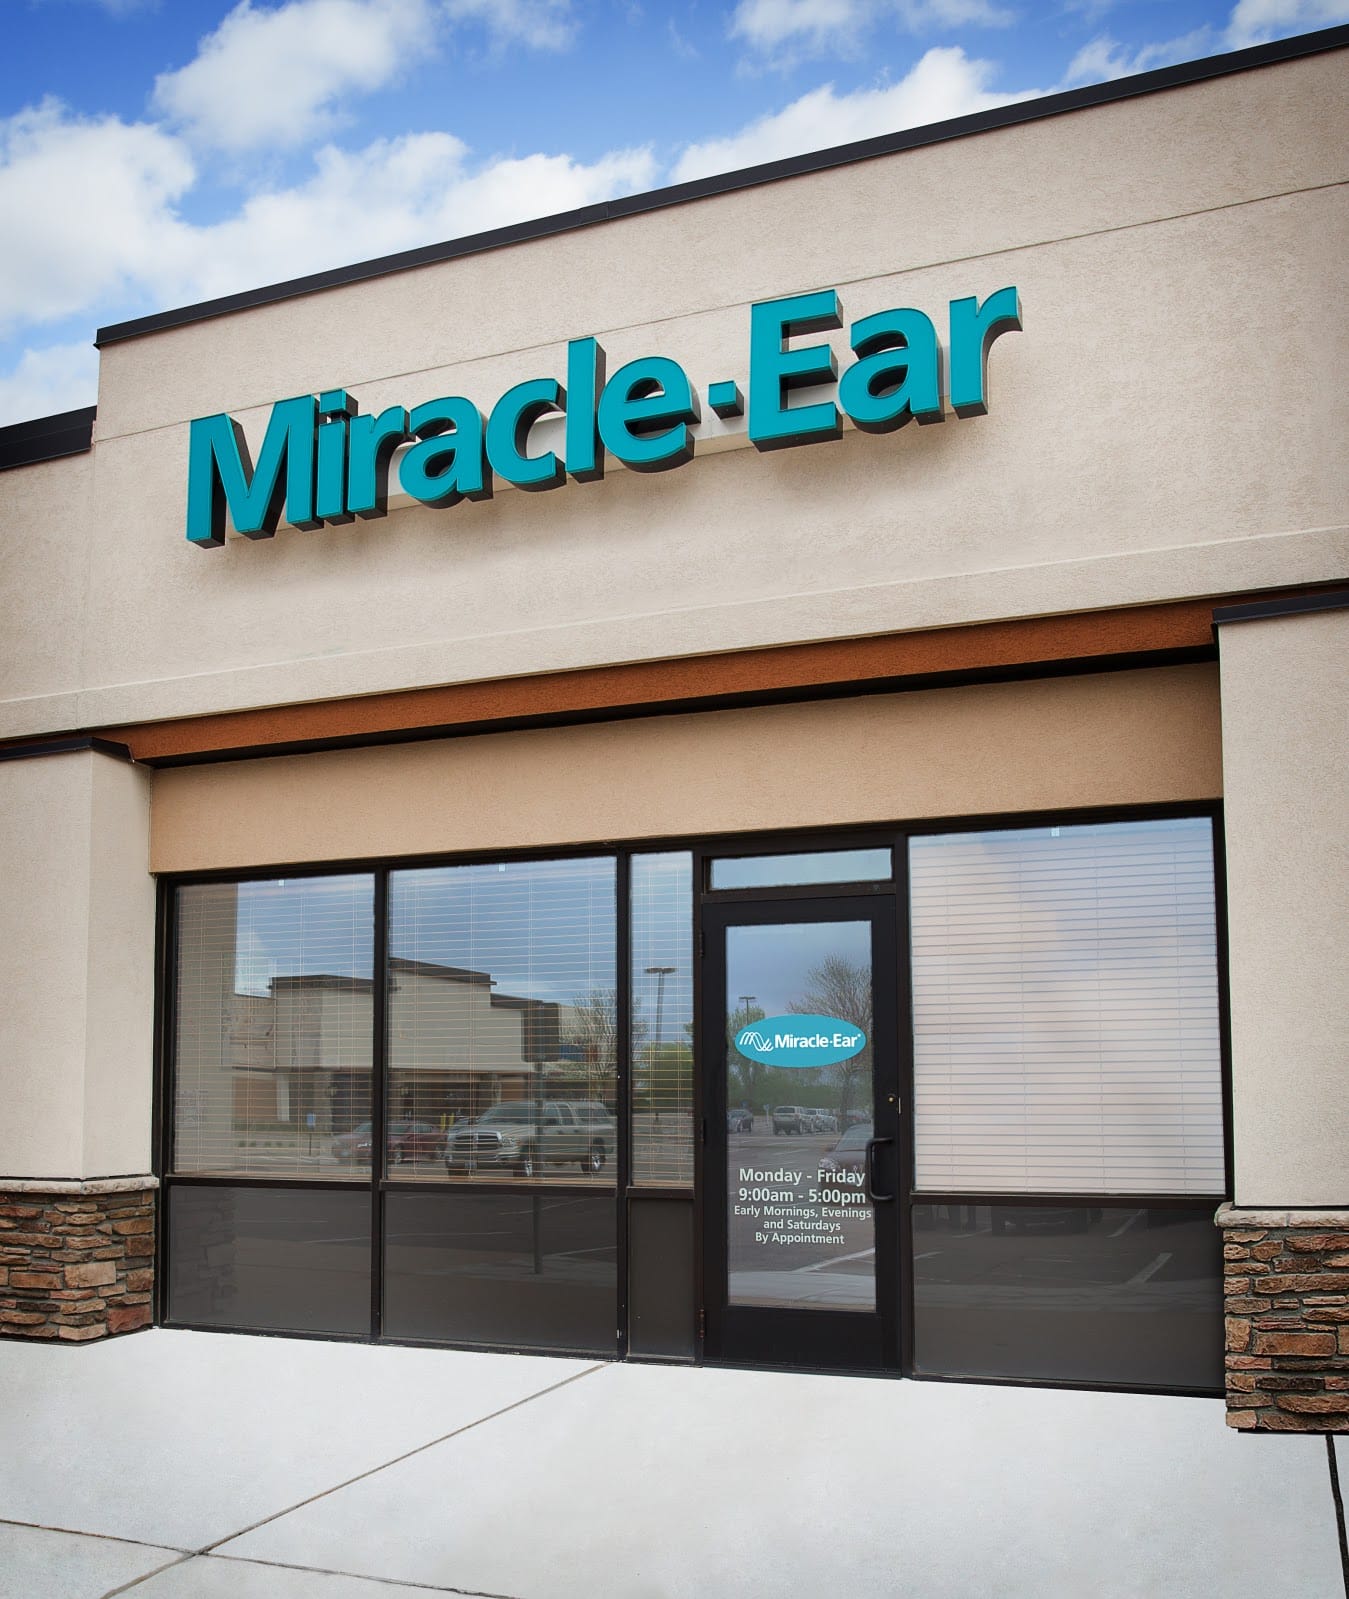 Miracle-Ear Hearing Aid Center - Richmond (IN 47374), US, tiny hearing aids